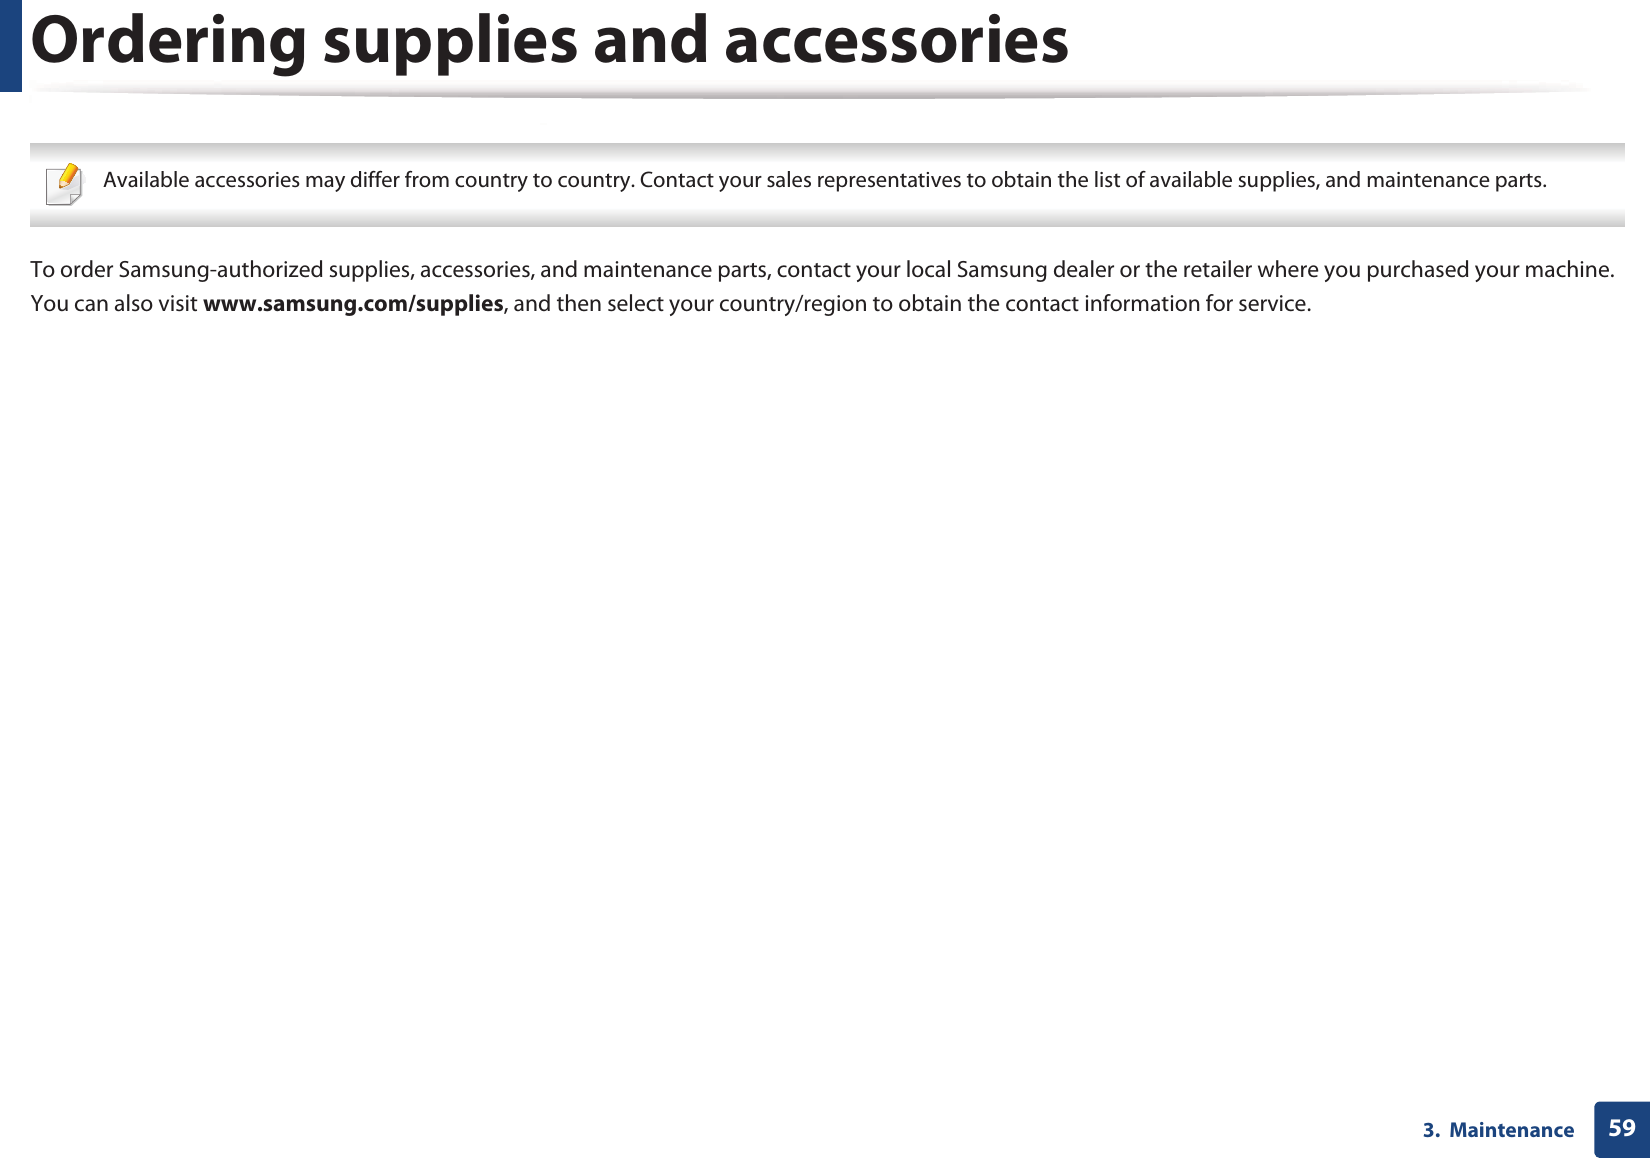 593.  MaintenanceOrdering supplies and accessories Available accessories may differ from country to country. Contact your sales representatives to obtain the list of available supplies, and maintenance parts. To order Samsung-authorized supplies, accessories, and maintenance parts, contact your local Samsung dealer or the retailer where you purchased your machine. You can also visit www.samsung.com/supplies, and then select your country/region to obtain the contact information for service.